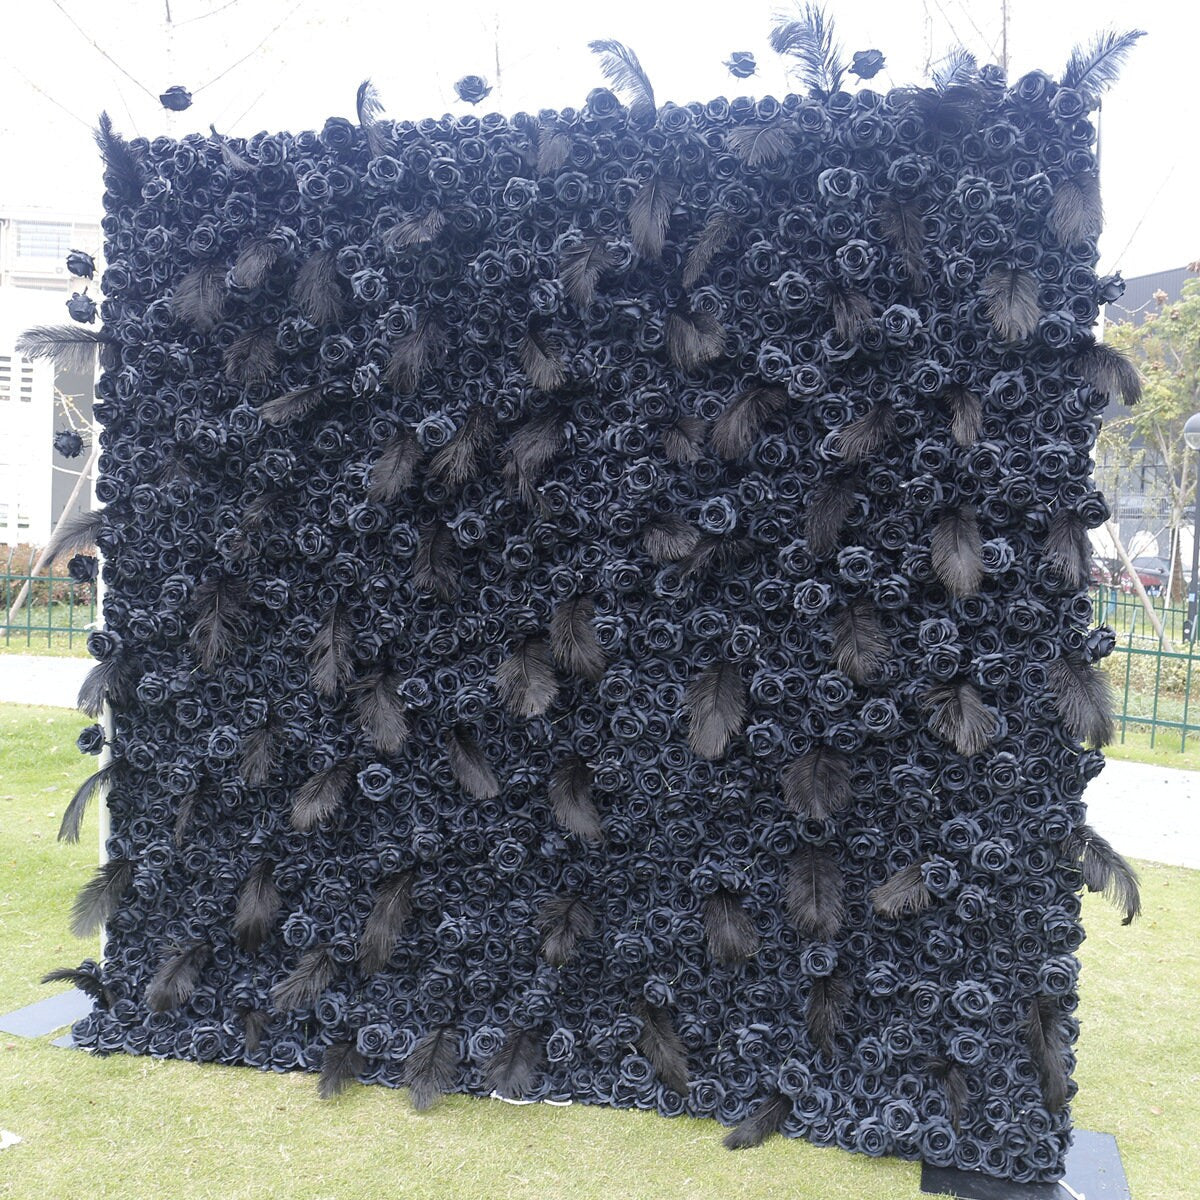 New Design Black Flower Whether Wall For Wedding Arrangement Event Salon Party Photography Backdrop Fabric Rolling Up Curtain Fabric Cloth